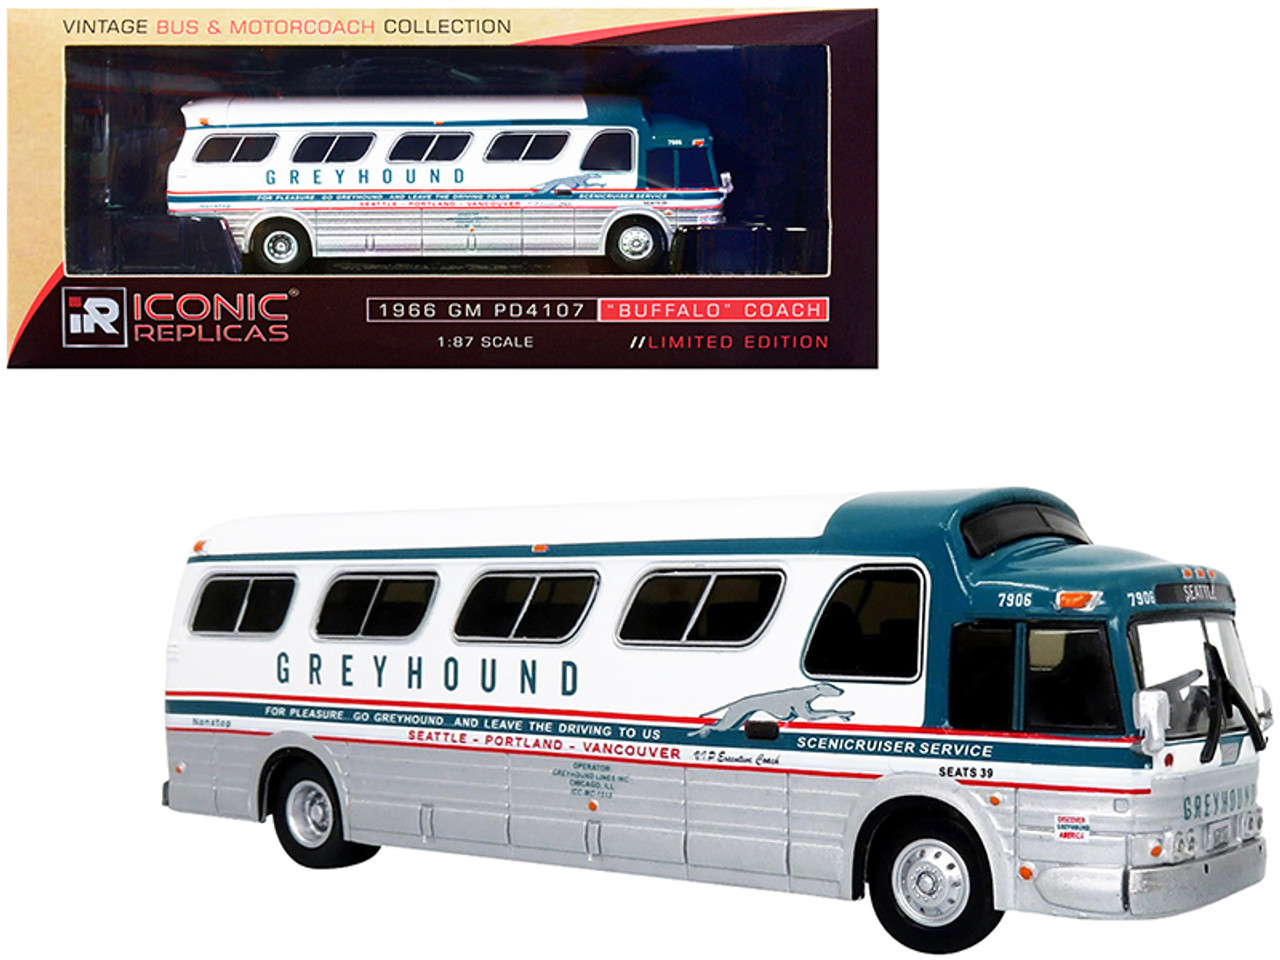 1966 GM PD4107 "Buffalo" Coach Bus "Greyhound" Destination: Seattle (Washington) "Seattle - Portland - Vancouver" "Vintage Bus & Motorcoach Collection" 1/87 Diecast Model by Iconic Replicas